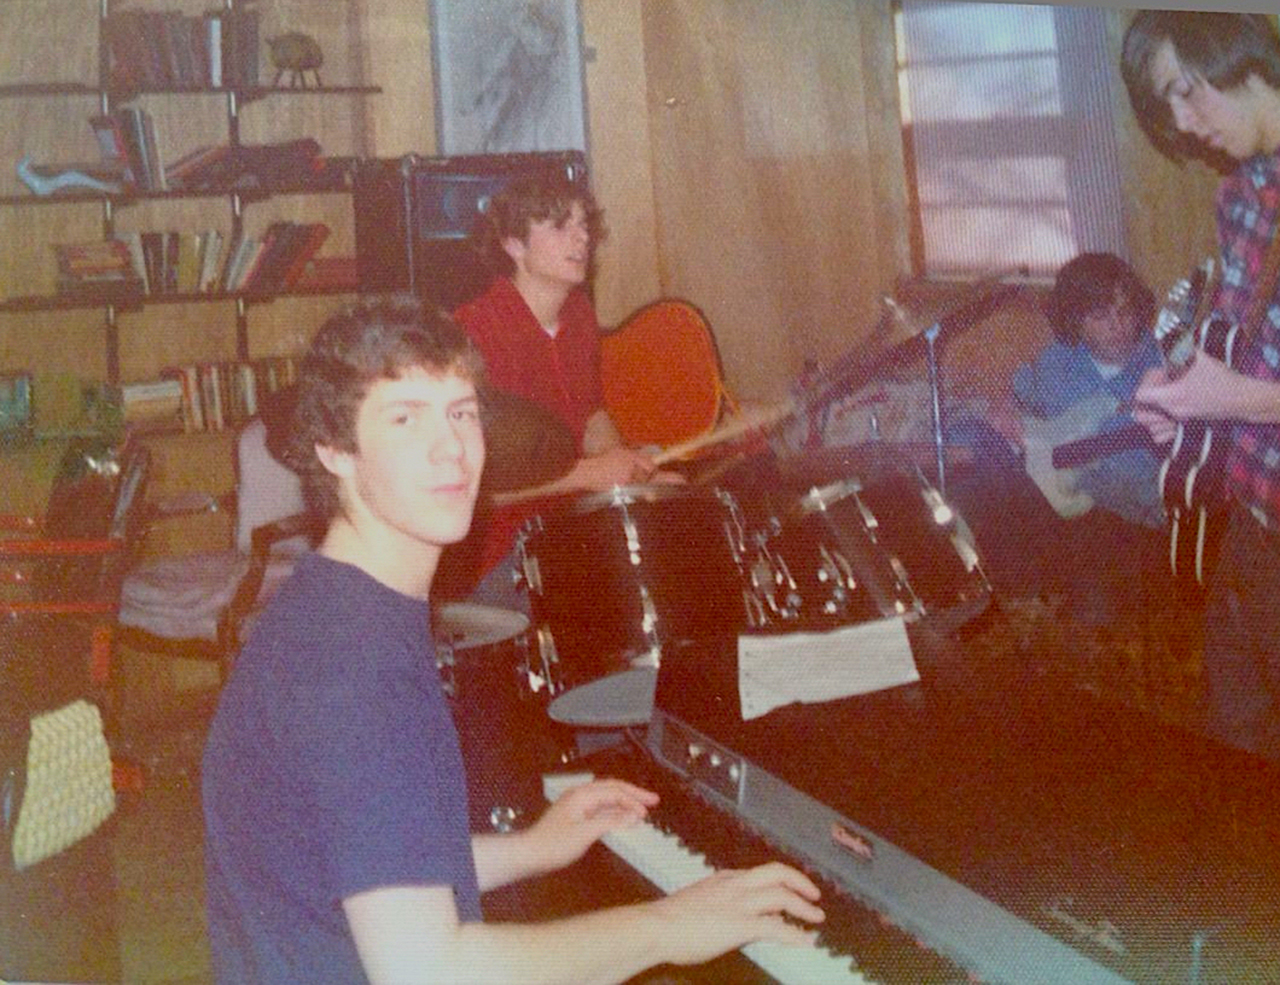 Edge, Larchmont rehearsal, 1973. Or maybe it was ‘74.